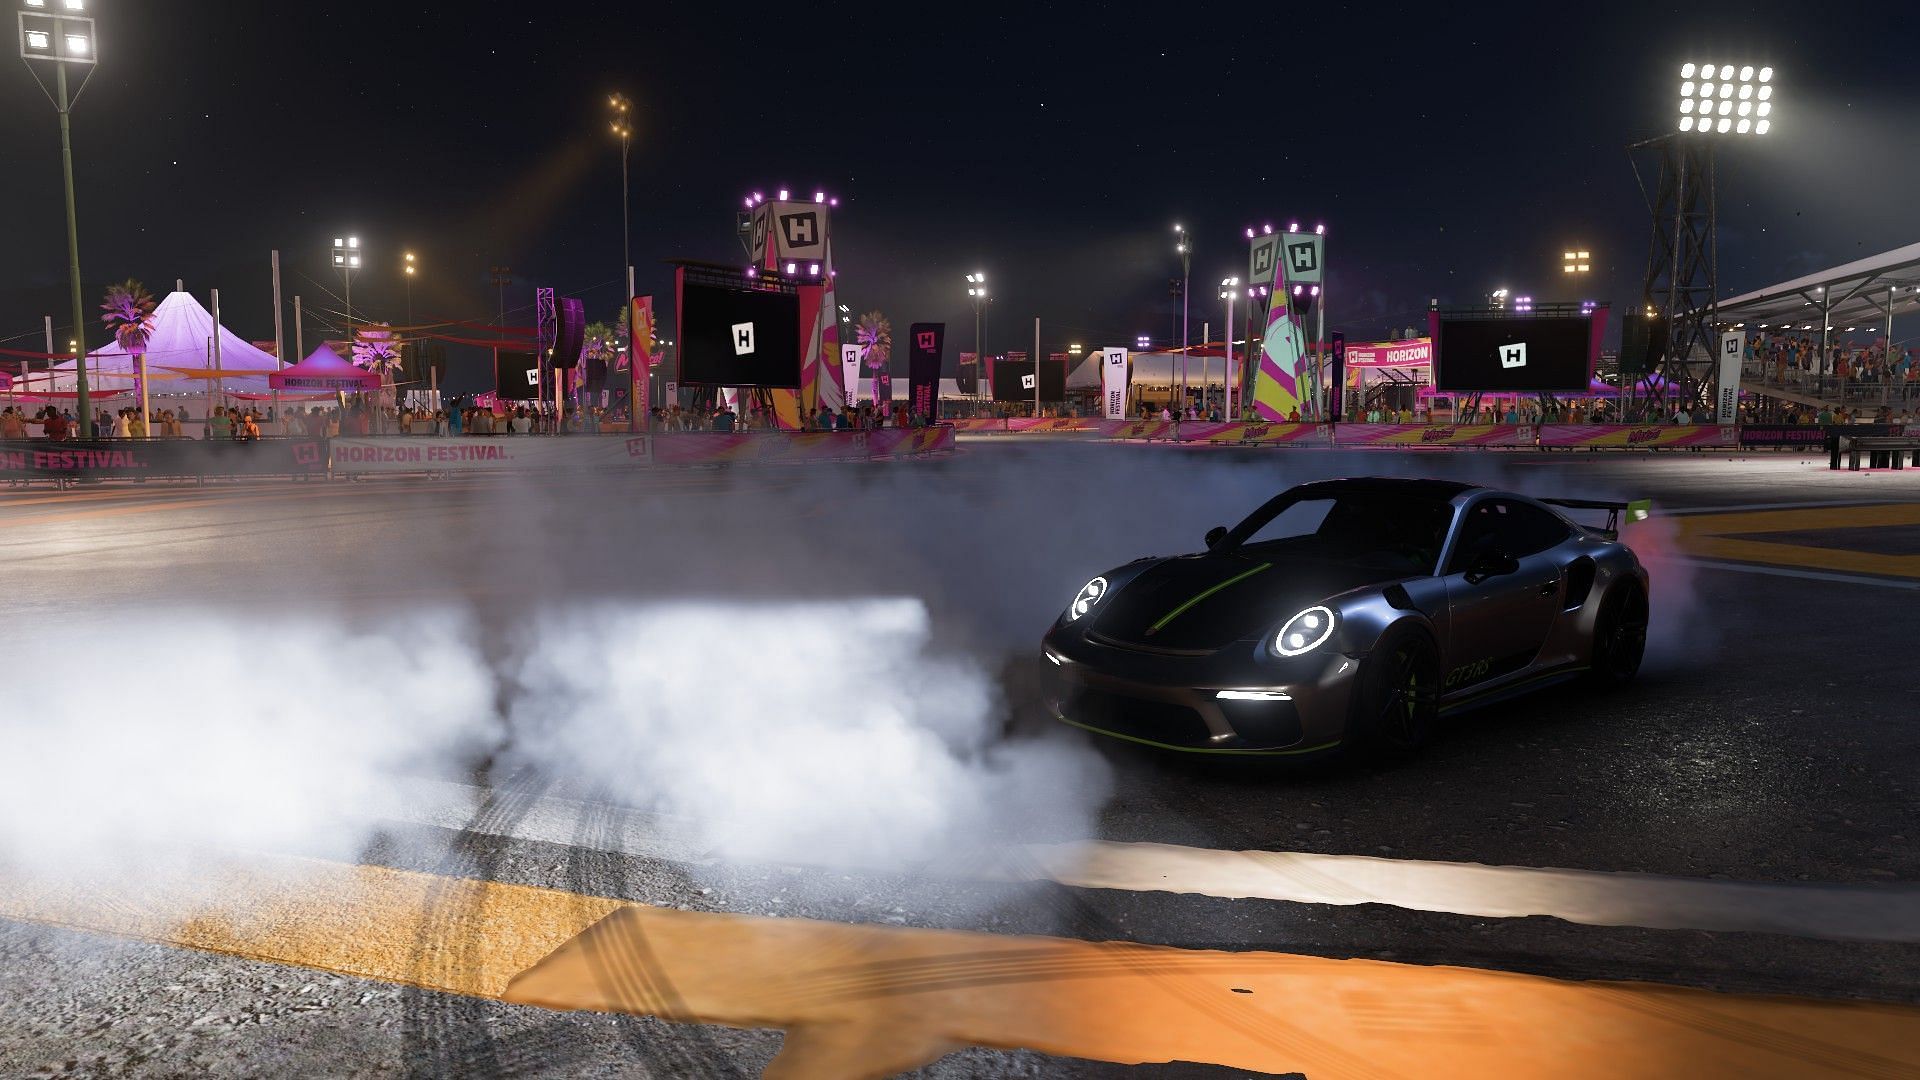 A Porsche doing a spin in front of the festival crowd (Image via Playground Games)